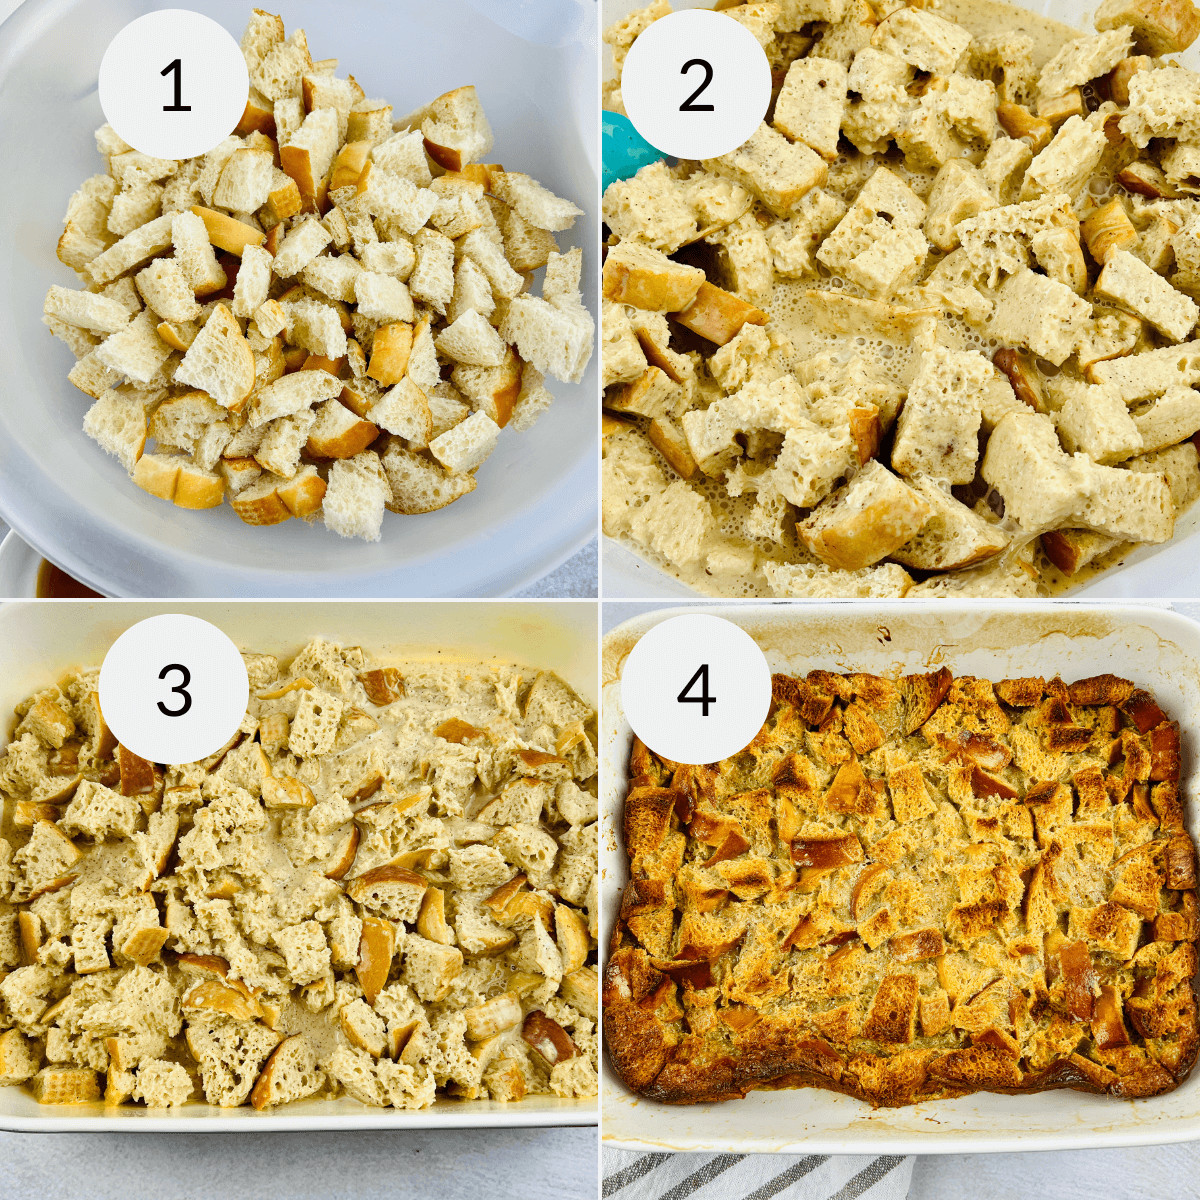 Step-by-step progression of making a bread pudding with vanilla sauce, from raw ingredients to finished dish.